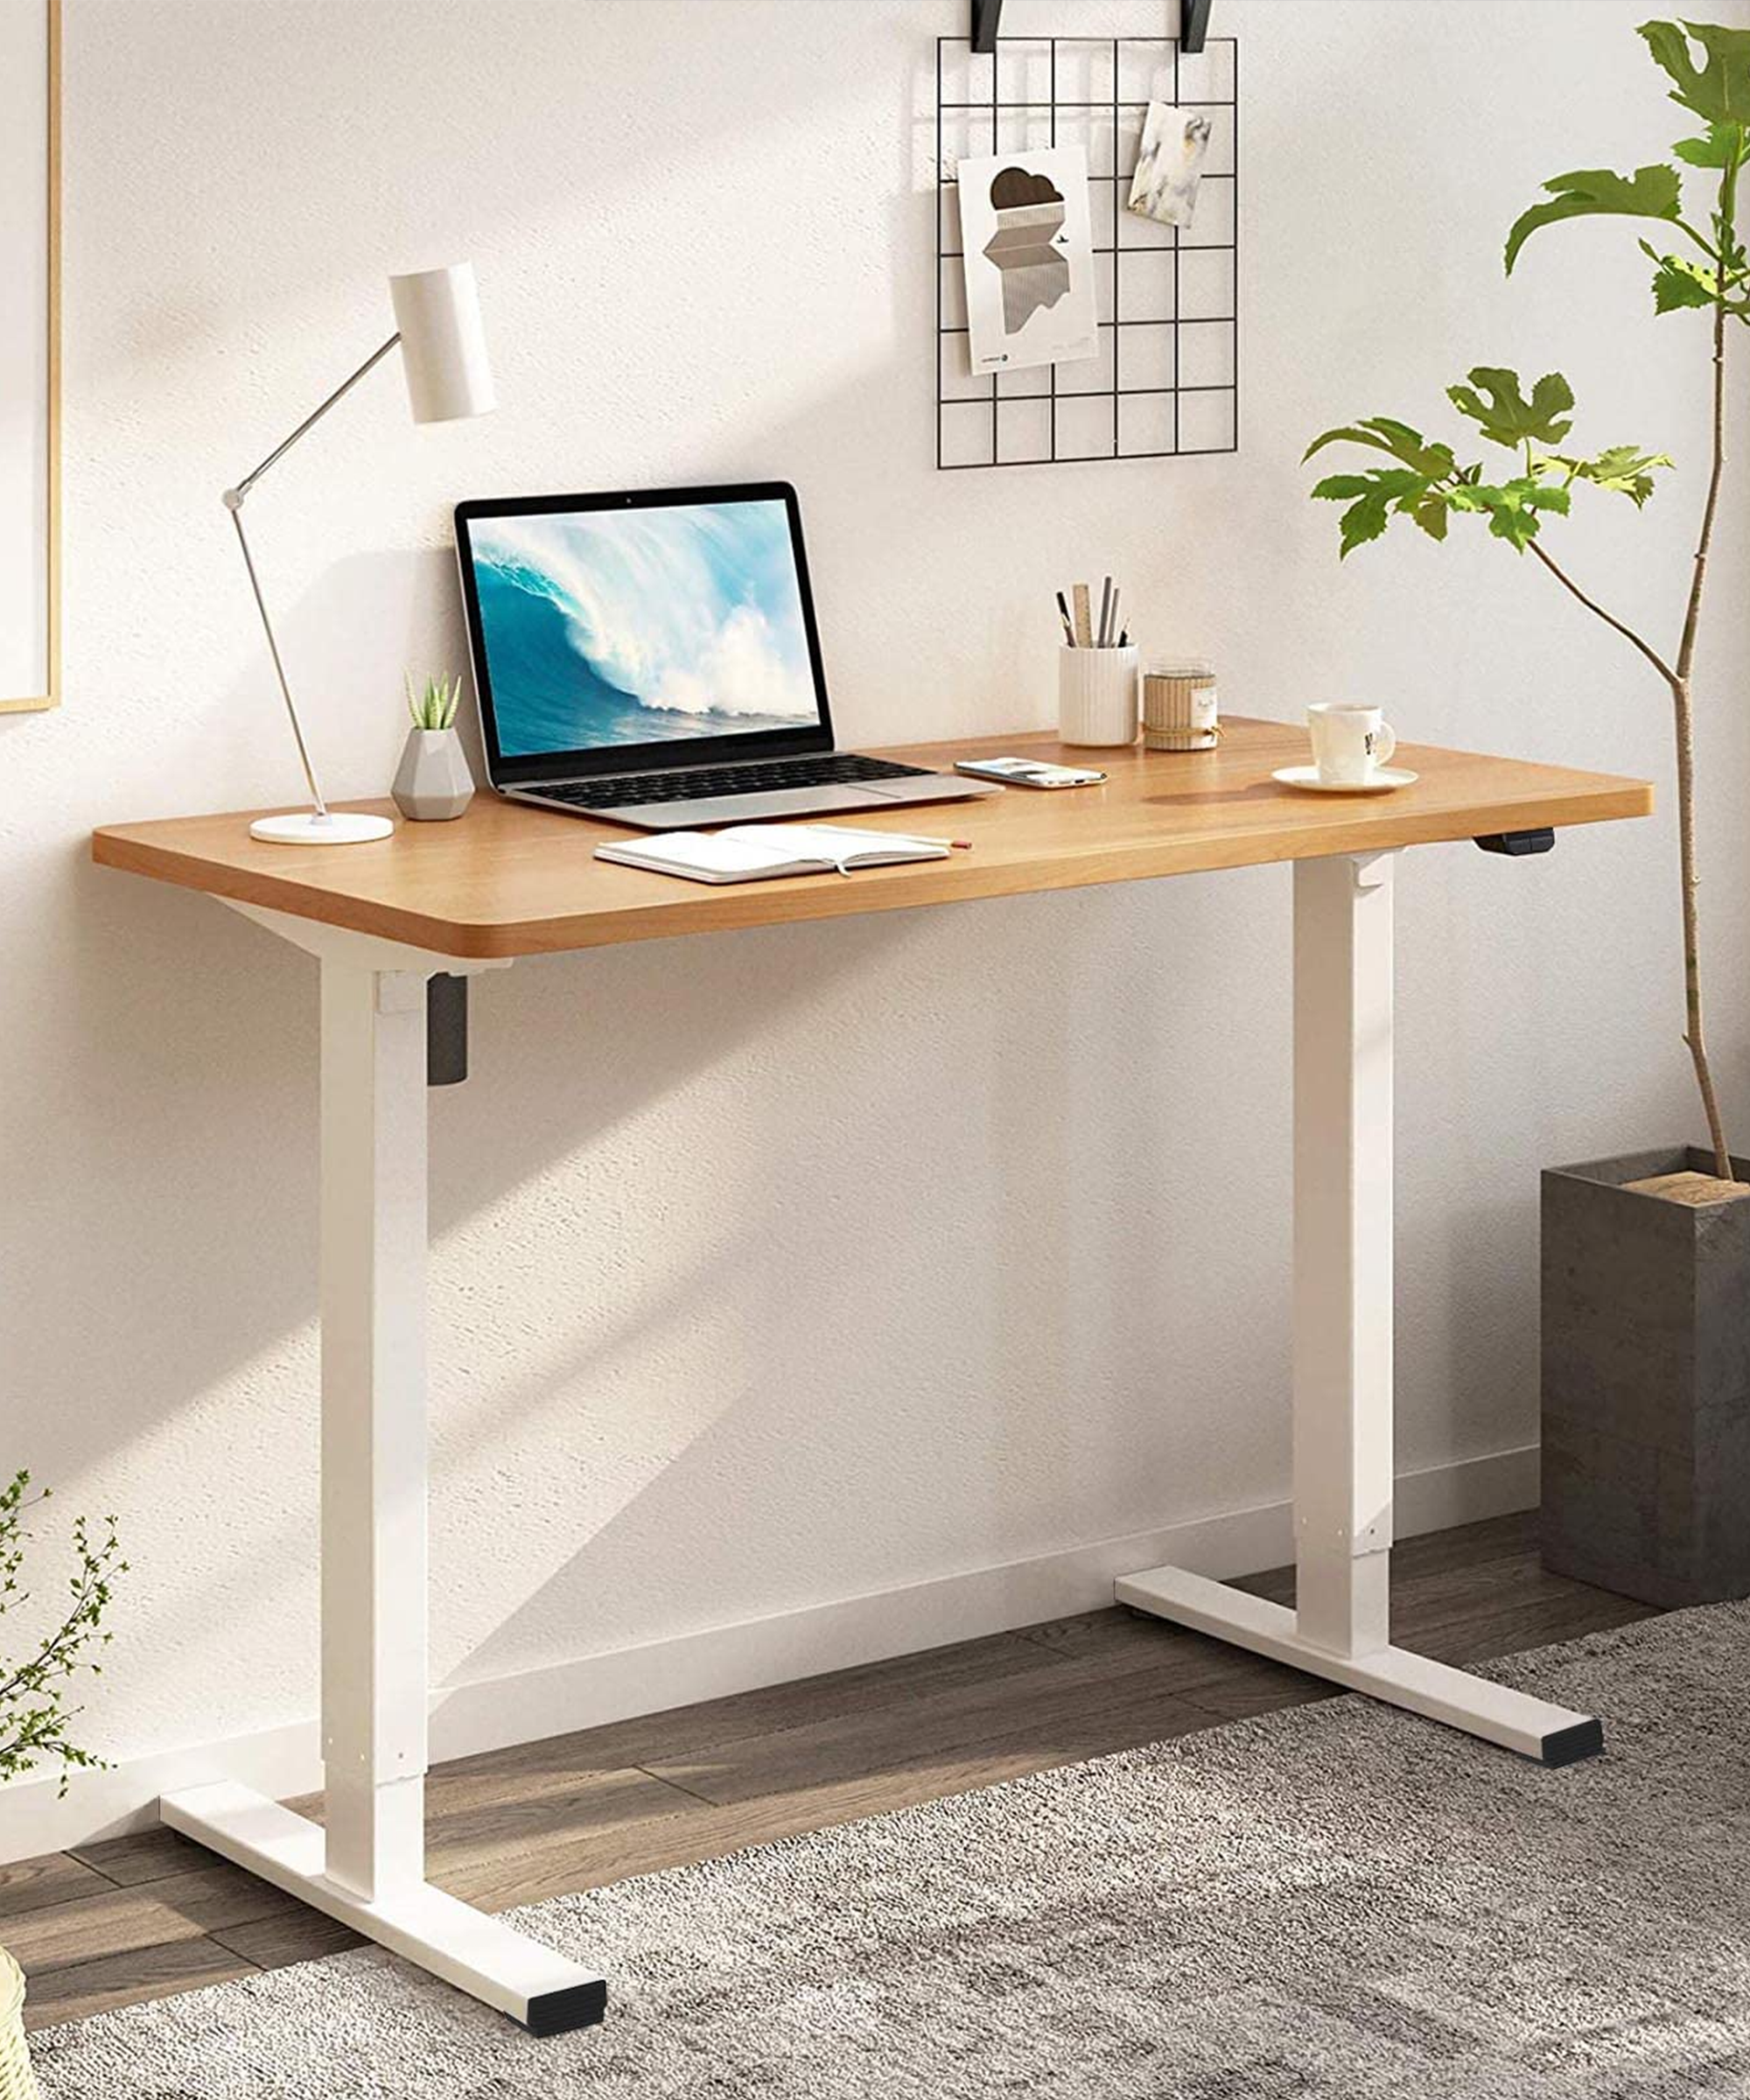 The Best Amazon Home Office Furniture: Chairs, Desks